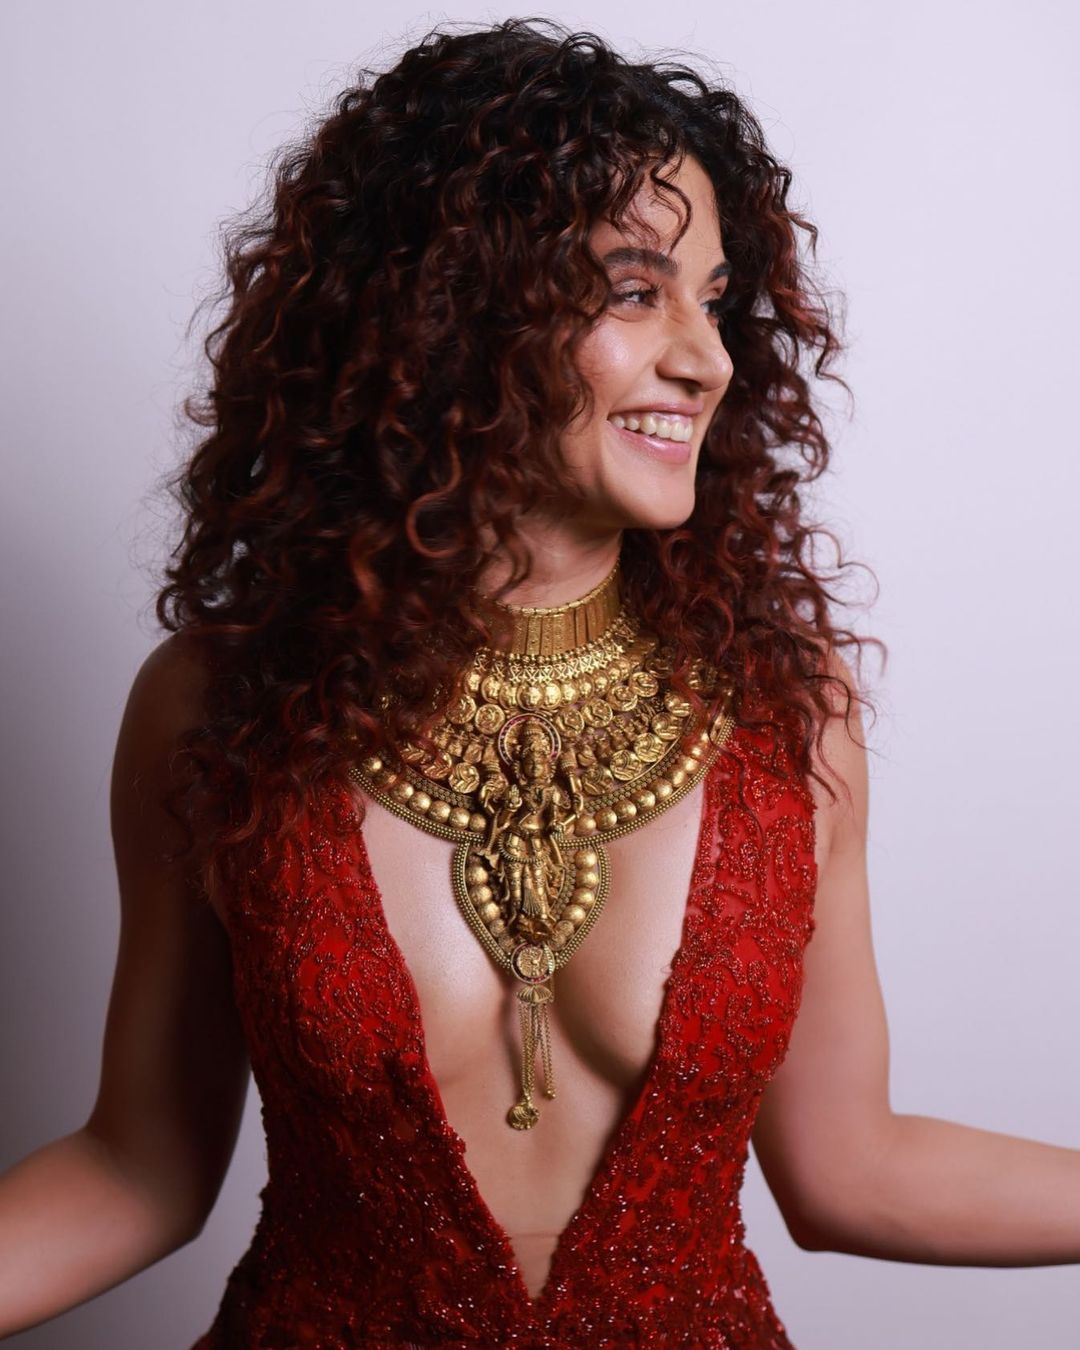 Taapsee Pannu Looks Smoking Hot In Red, Check Out The Diva's Sexy ...